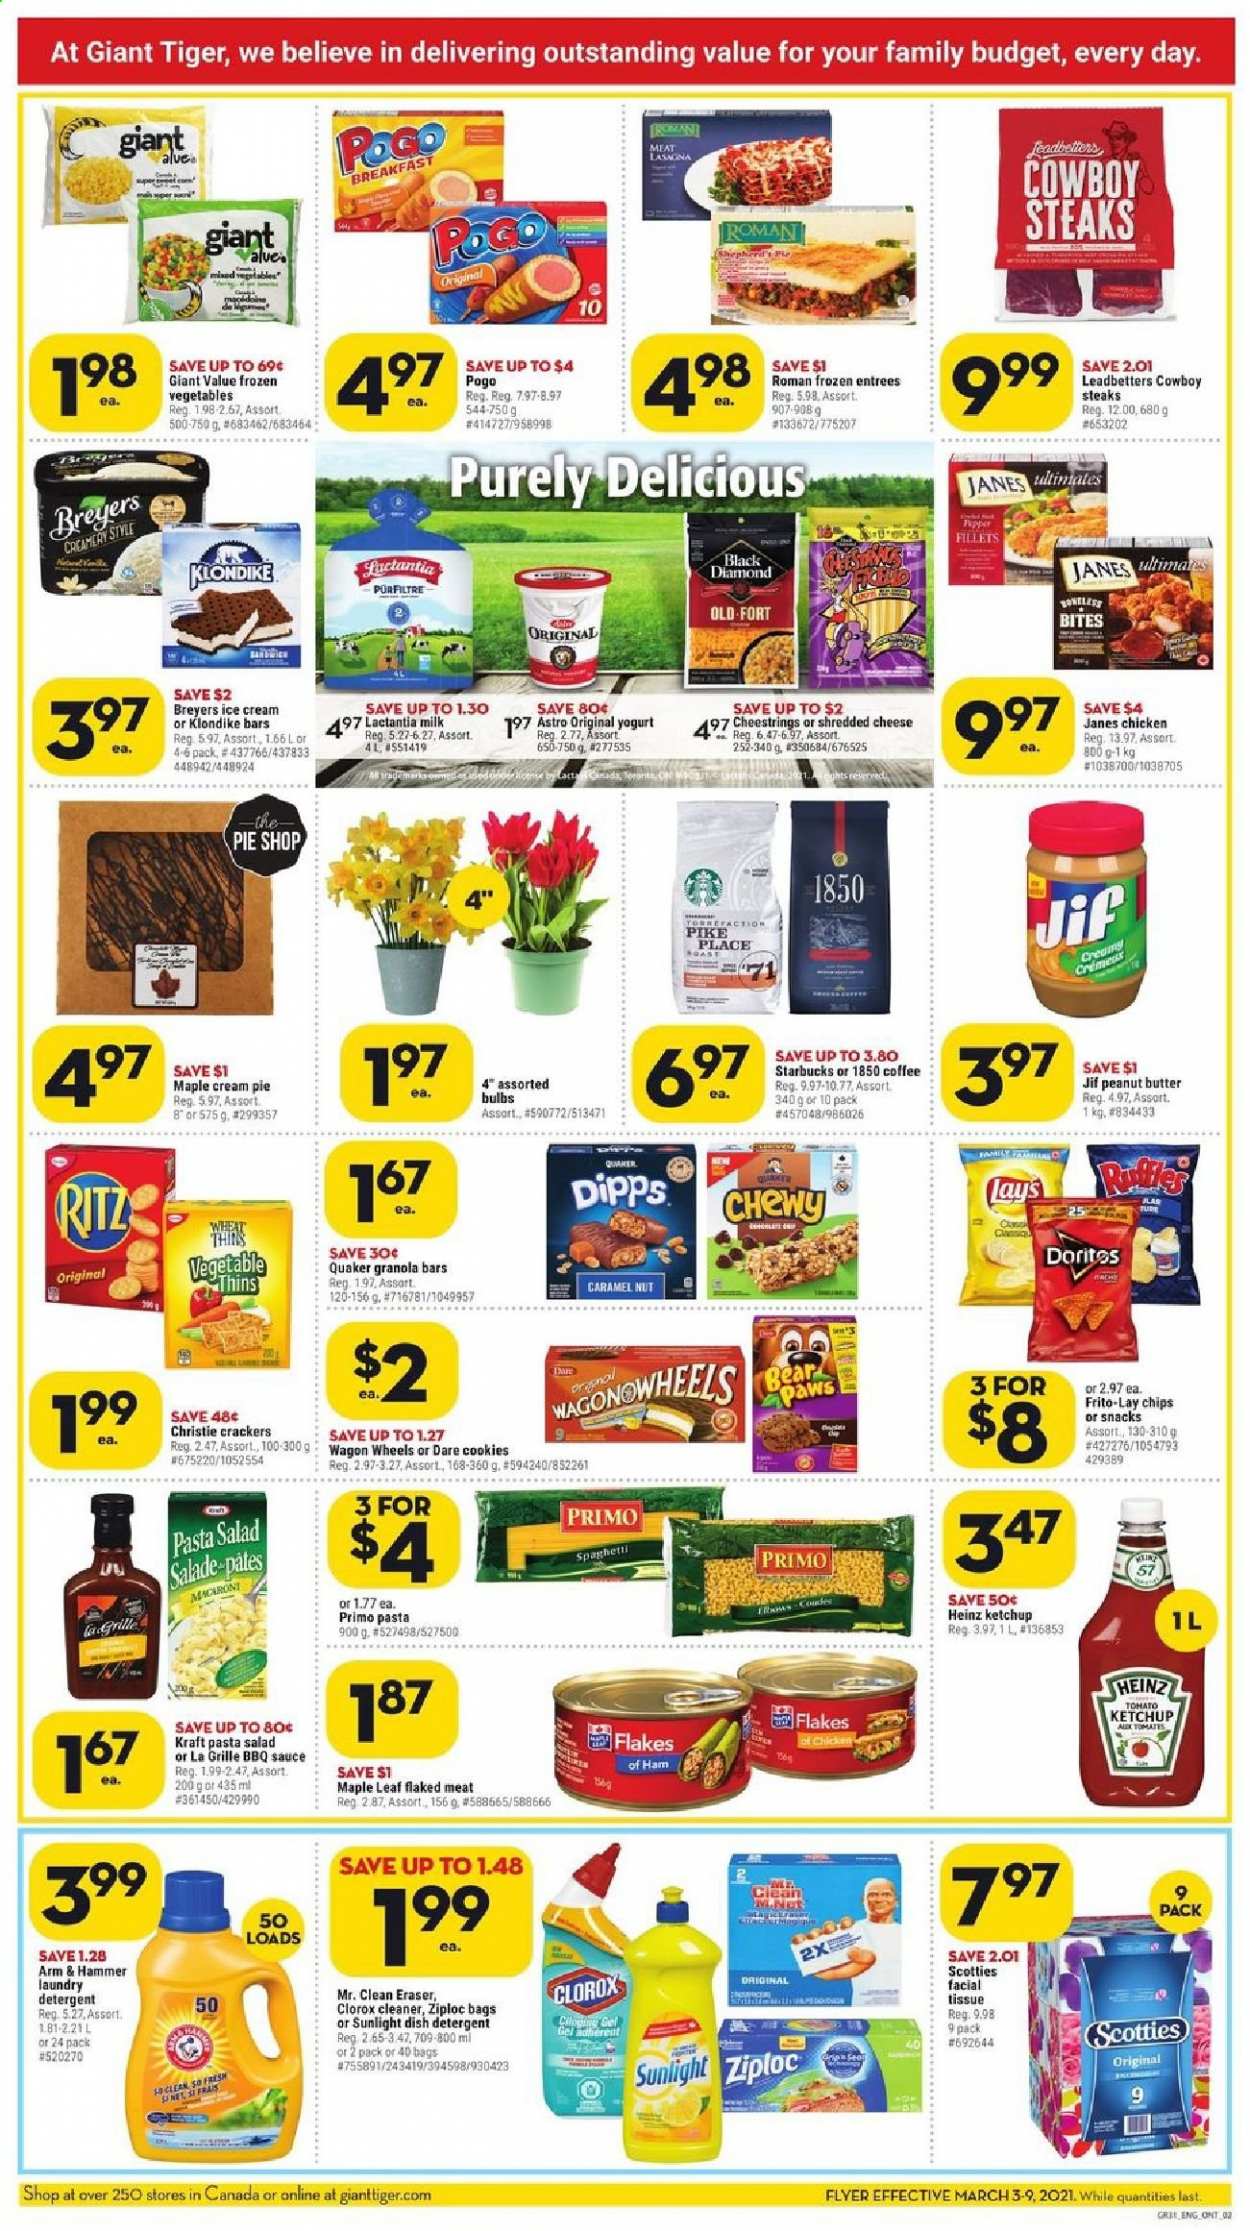 thumbnail - Giant Tiger Flyer - March 03, 2021 - March 09, 2021 - Sales products - pie, cream pie, spaghetti, macaroni, pasta, sauce, Quaker, lasagna meal, Kraft®, ham, pasta salad, shredded cheese, string cheese, milk, ice cream, frozen vegetables, mixed vegetables, cookies, crackers, RITZ, Lay’s, Thins, Frito-Lay, ARM & HAMMER, Heinz, granola bar, BBQ sauce, caramel, peanut butter, Jif, coffee, L'Or, Starbucks, tissues, cleaner, Clorox, laundry detergent, Sunlight, bag, Ziploc, eraser, Paws, wagon, steak. Page 2.